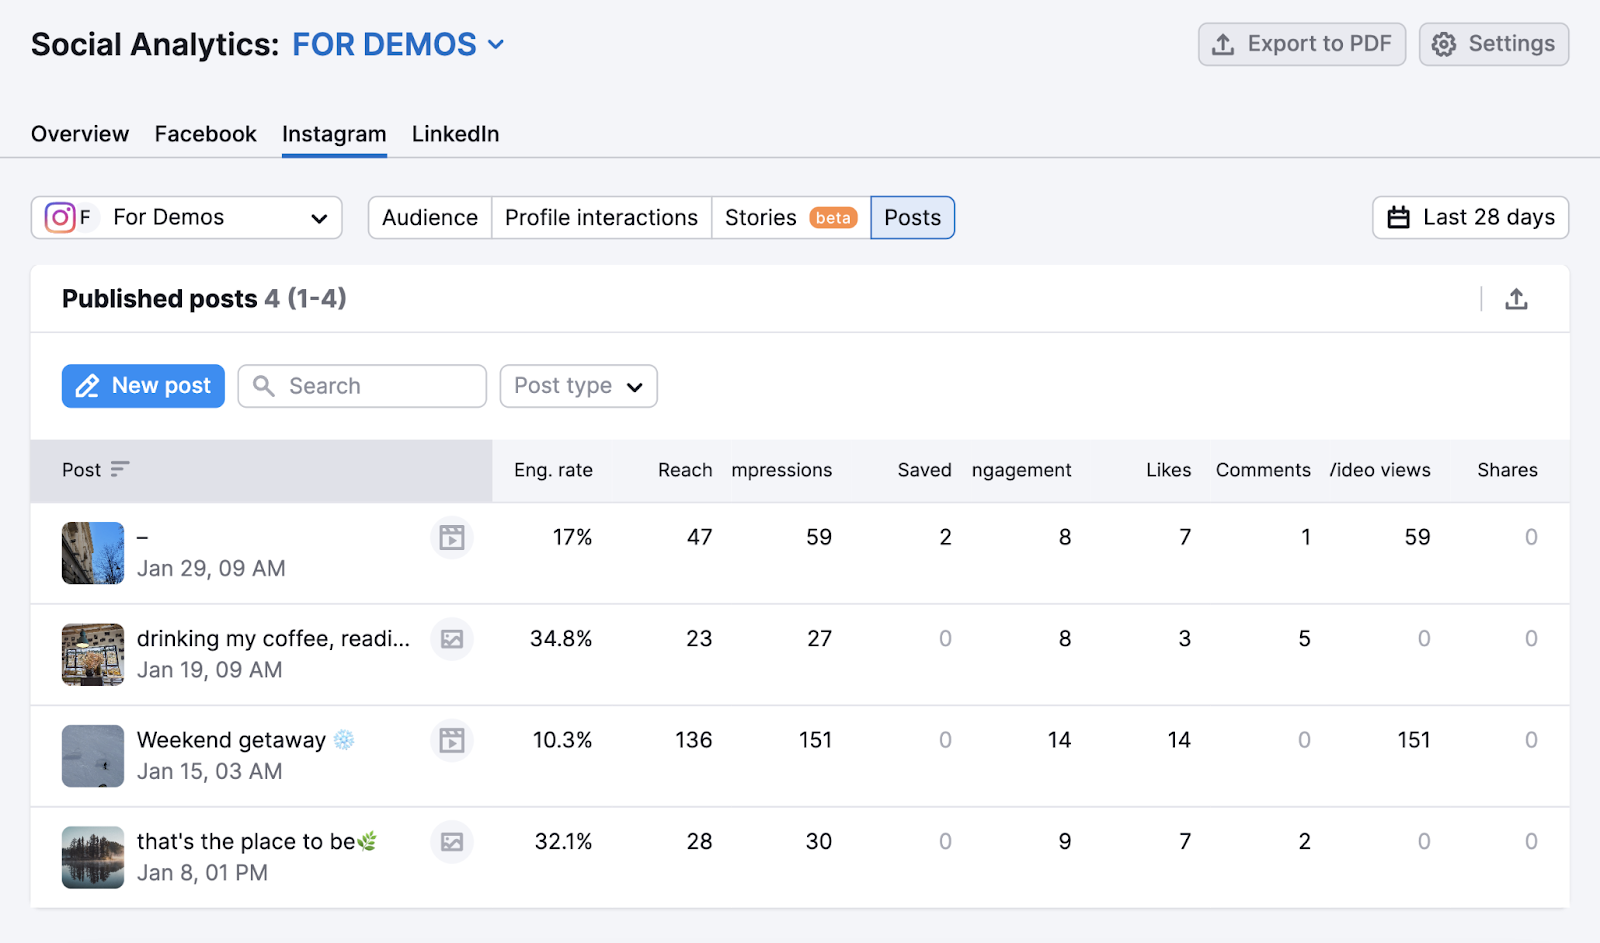 social media analytics tool shows instagram post data including engagement rate, reach, shares, and more